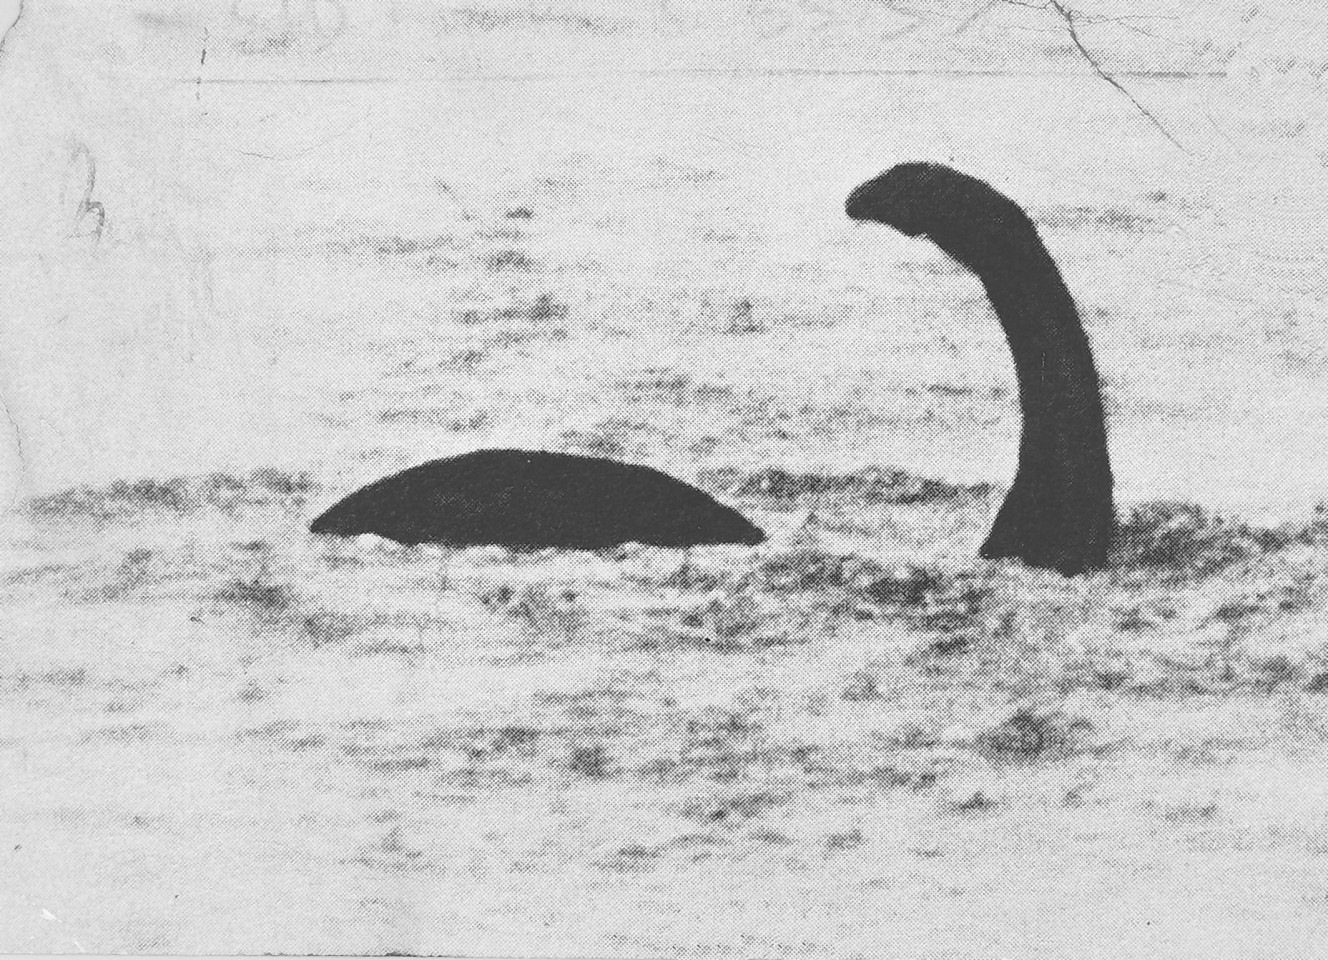 One of the famous 'pictures' of Nessie